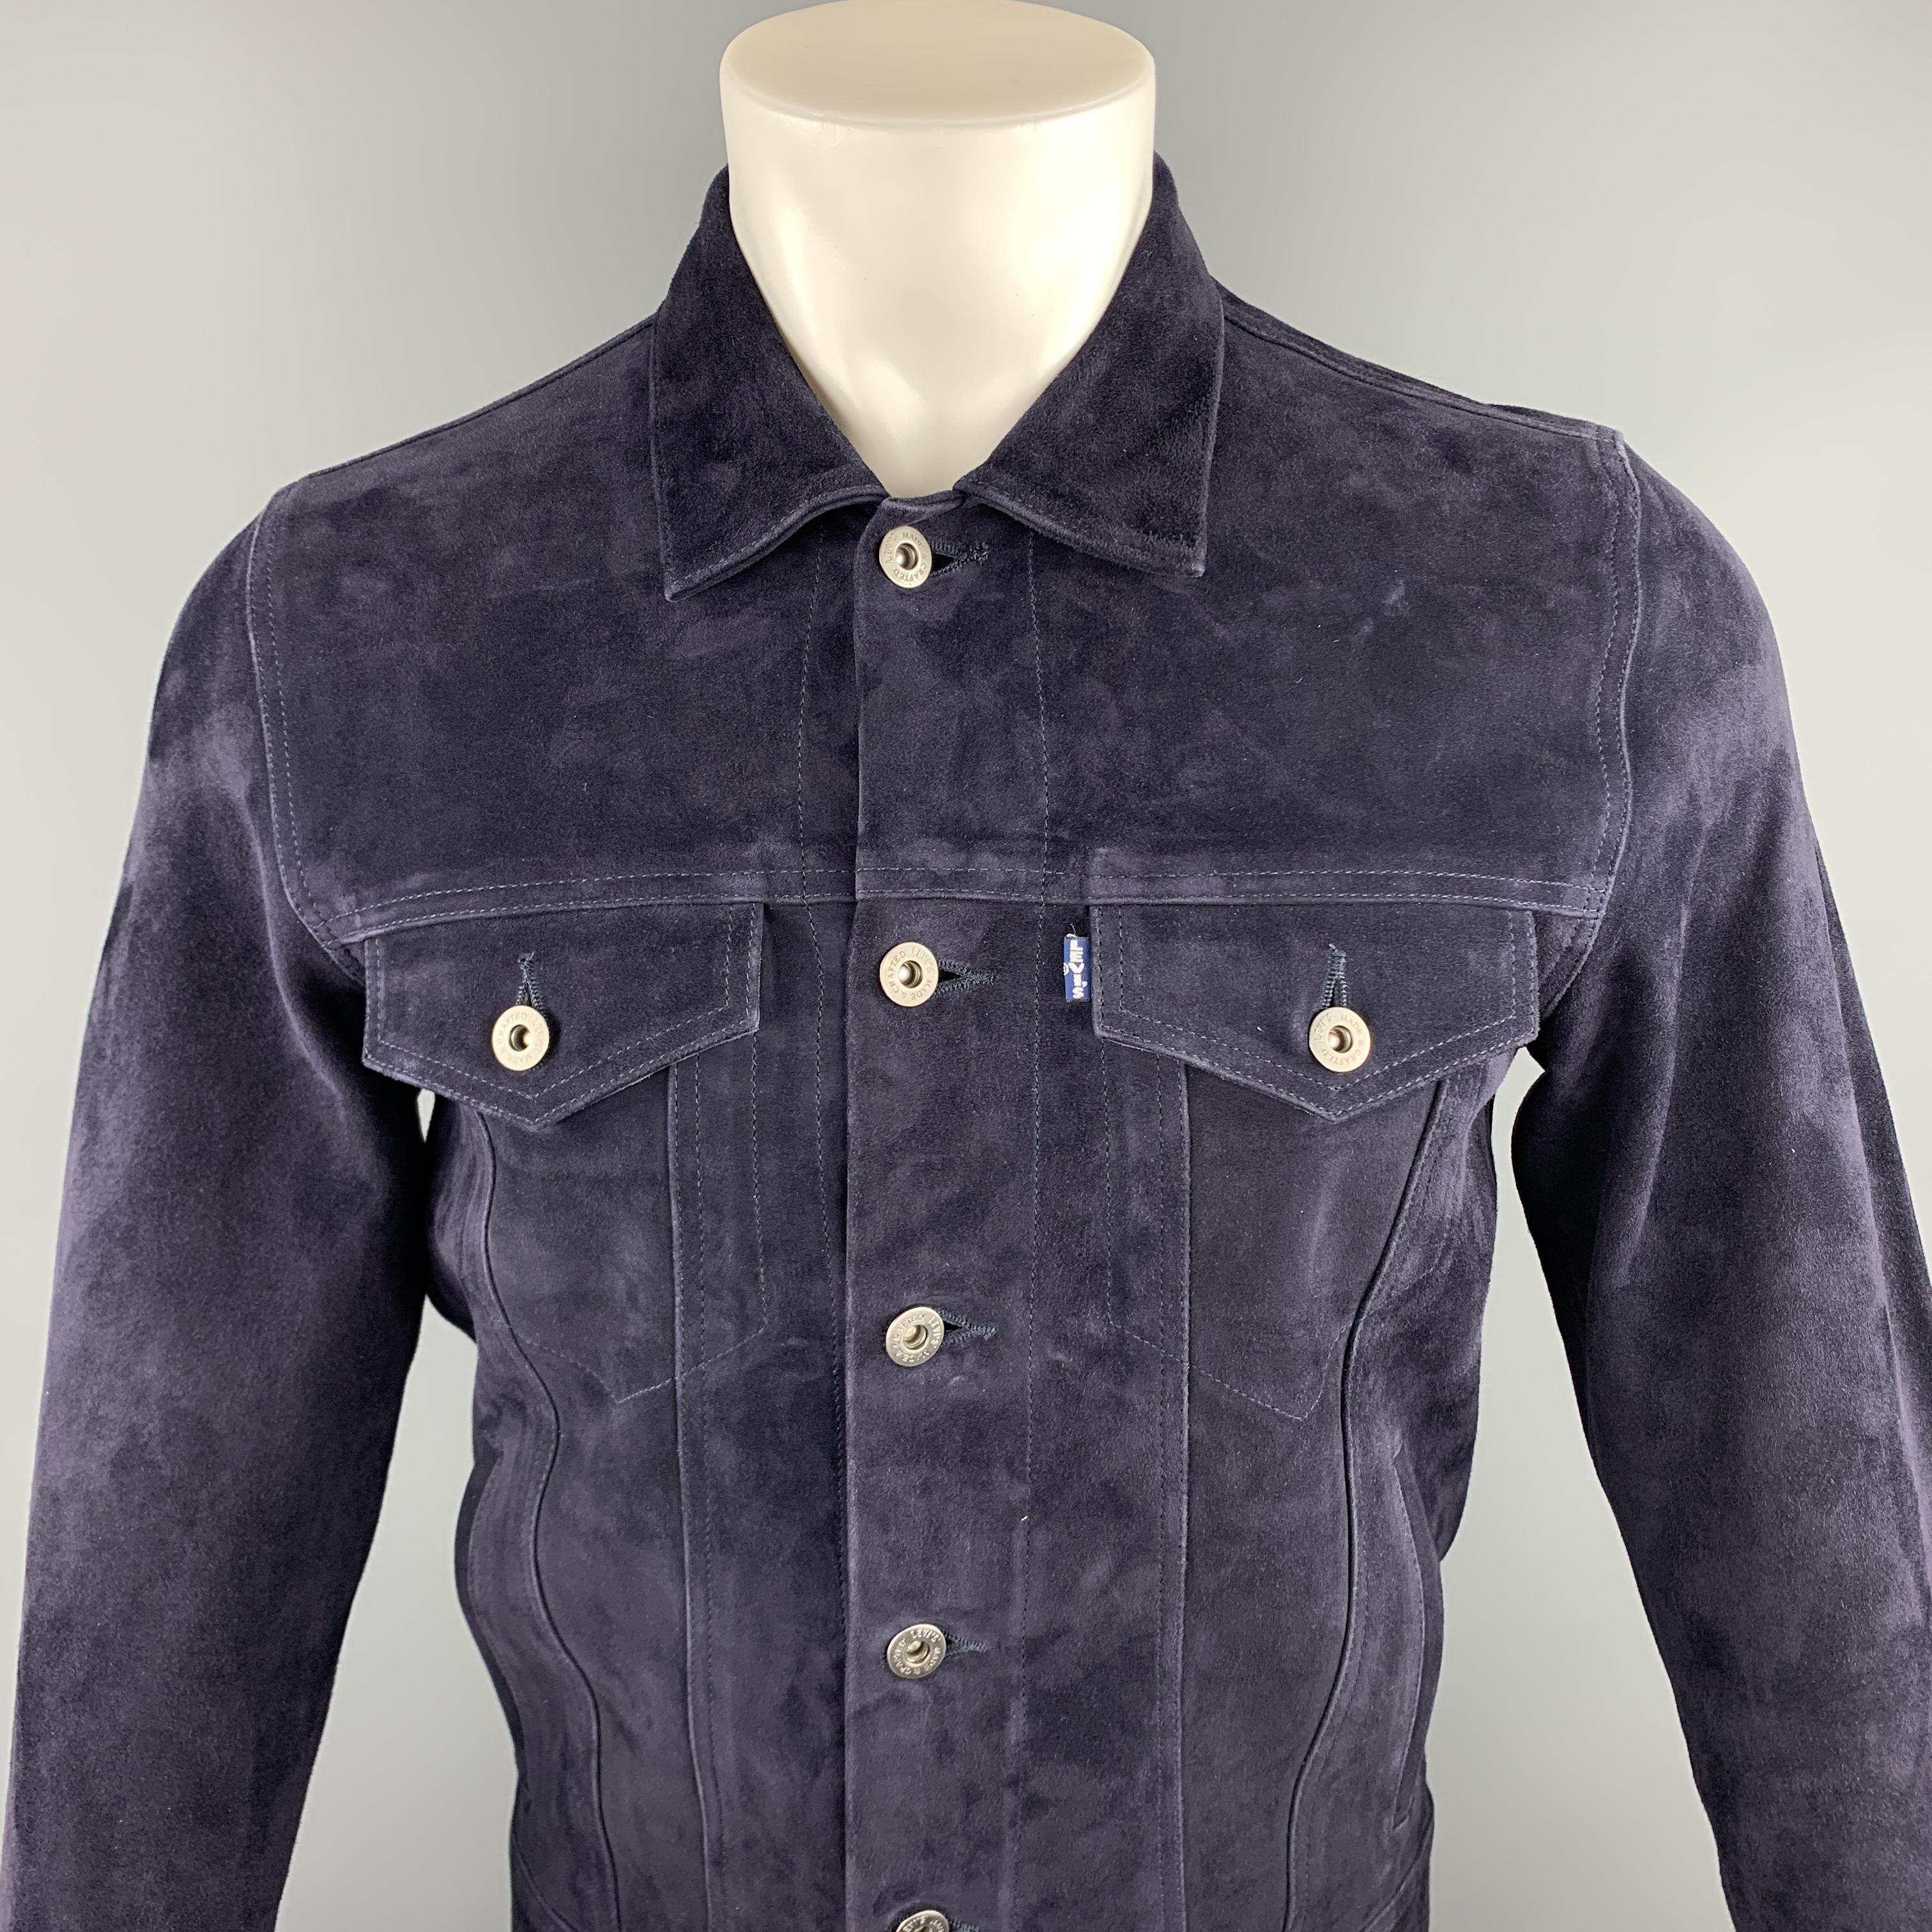 LEVI'S MADE & CRAFTED jacket comes in a navy suede featuring a trucker style, contrast stitching, and a buttoned closure.

New With Tags. 
Marked: S

Measurements:

Shoulder: 15 in. 
Chest: 38 in.
Sleeve: 26 in. 
Length: 24.5 in. 